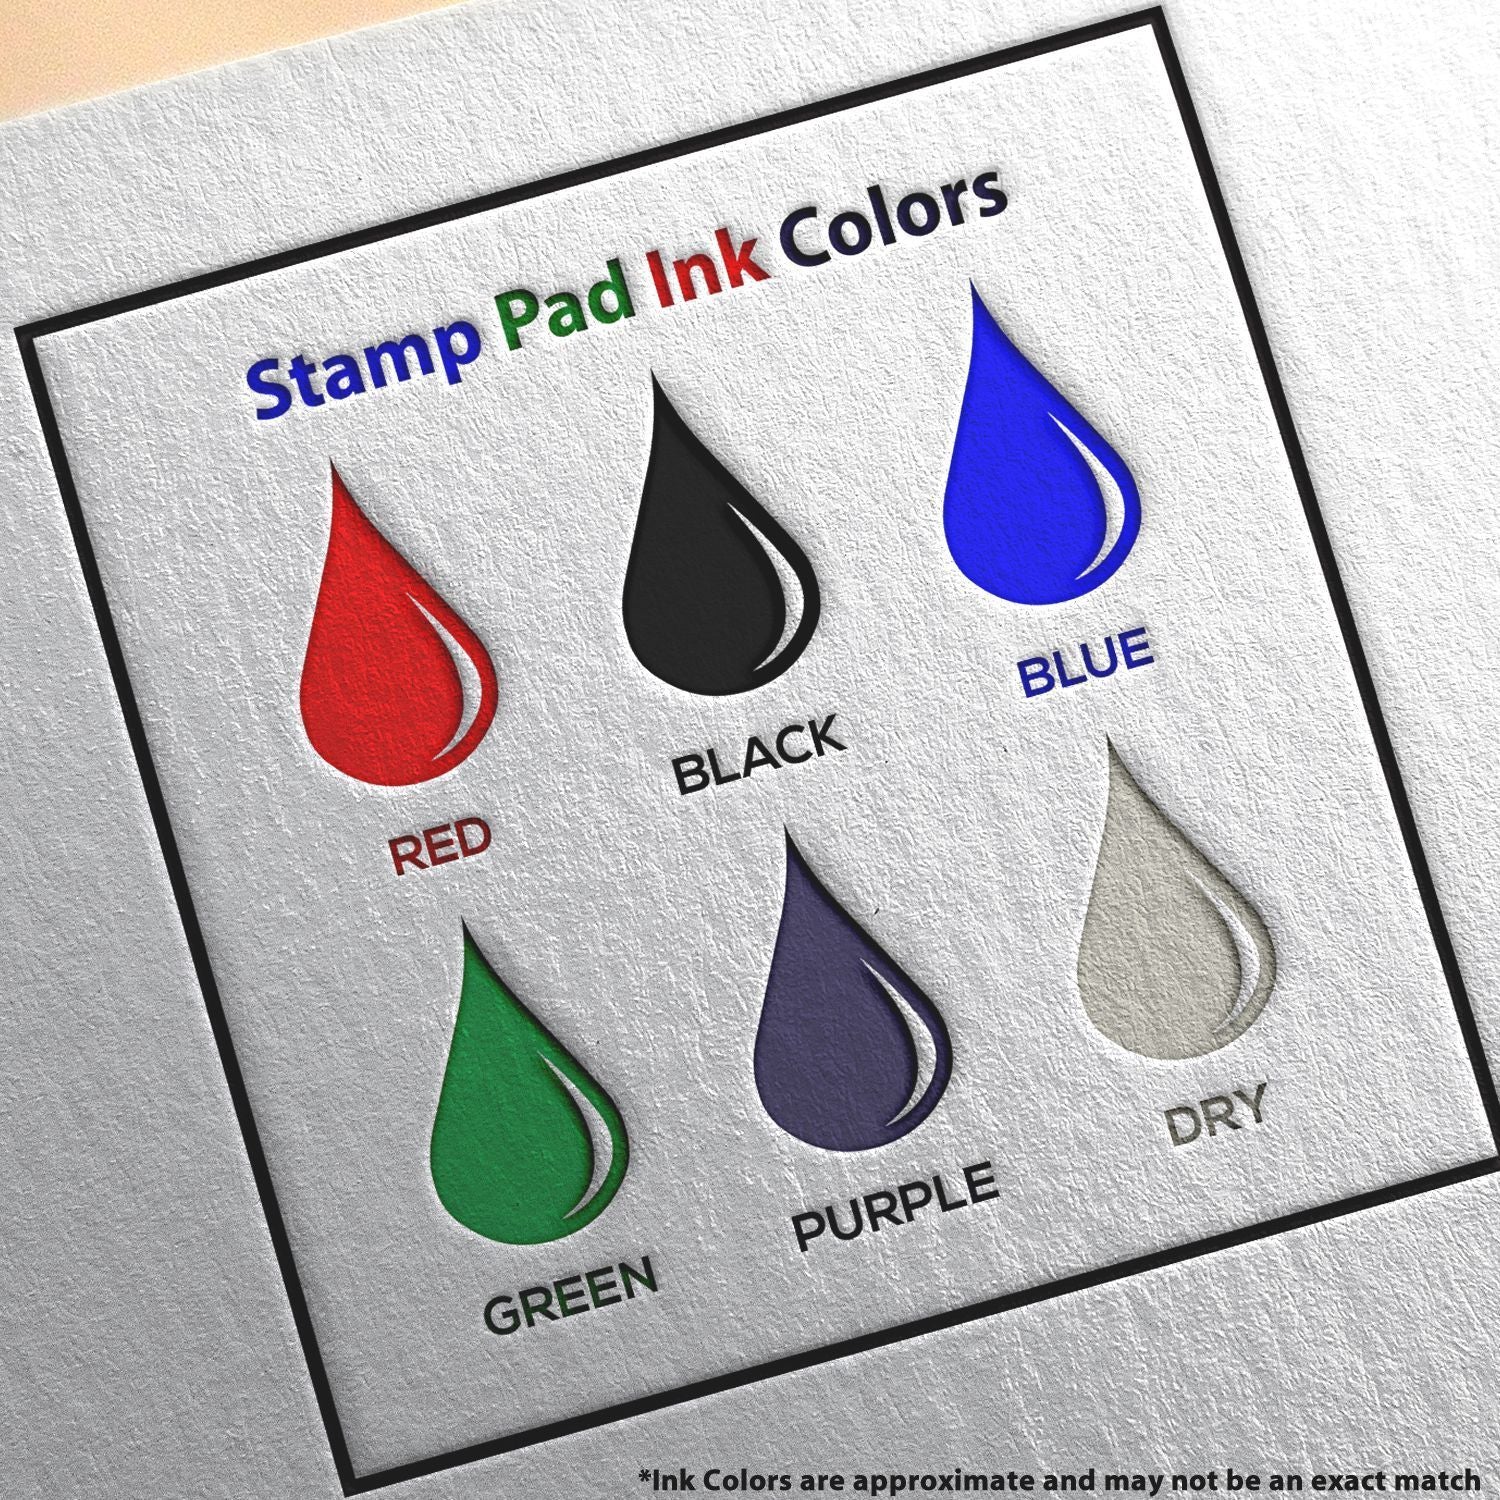 One Color Replacement Ink Pad For Hm 6100 E 900 E 910 Hm 6000 And Hm 6100 Dry